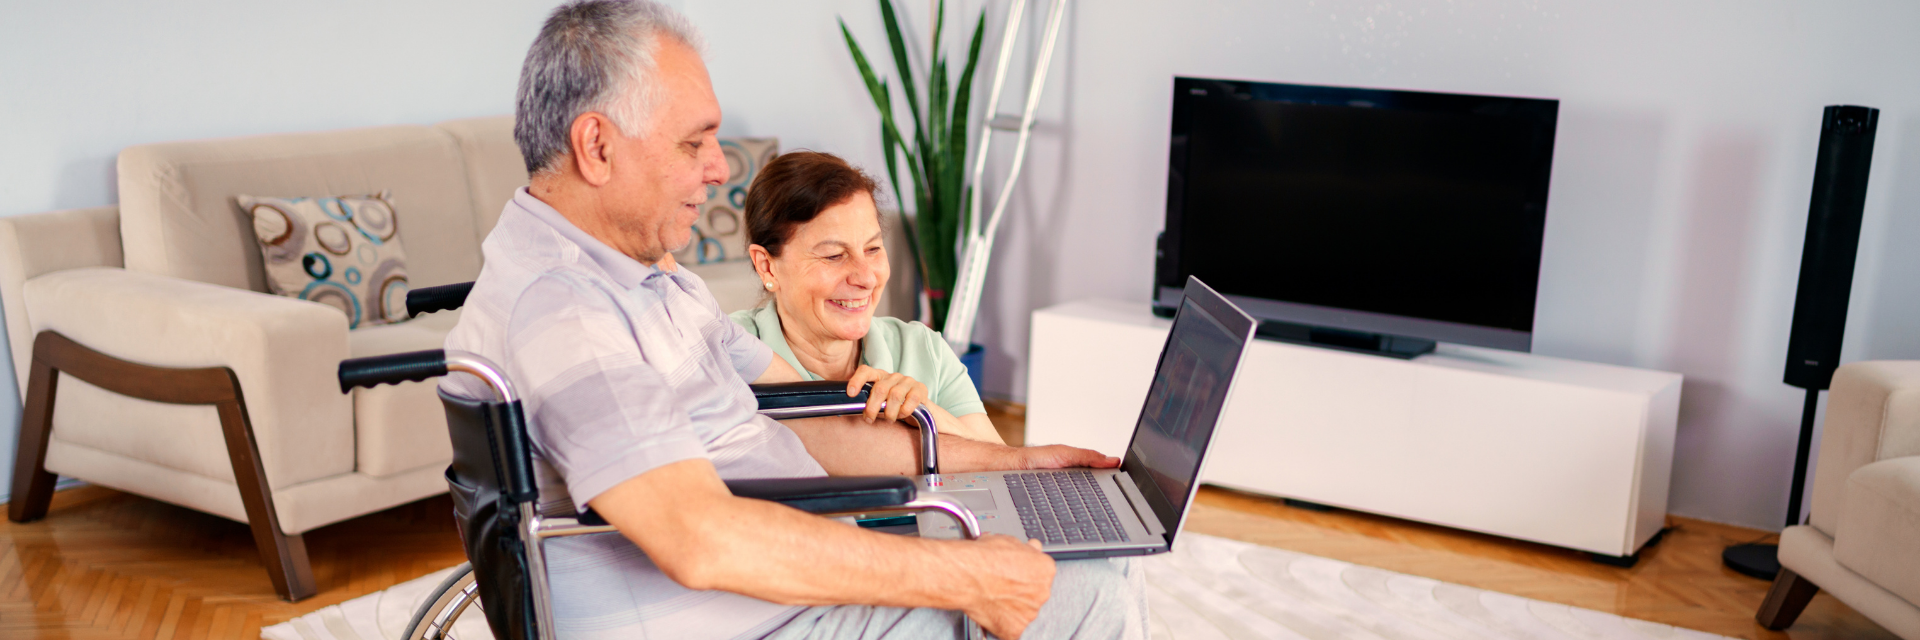 An older white man seated in a wheelchair at home talking on a video call with a laptop. A smiling older white woman is kneeling beside him.